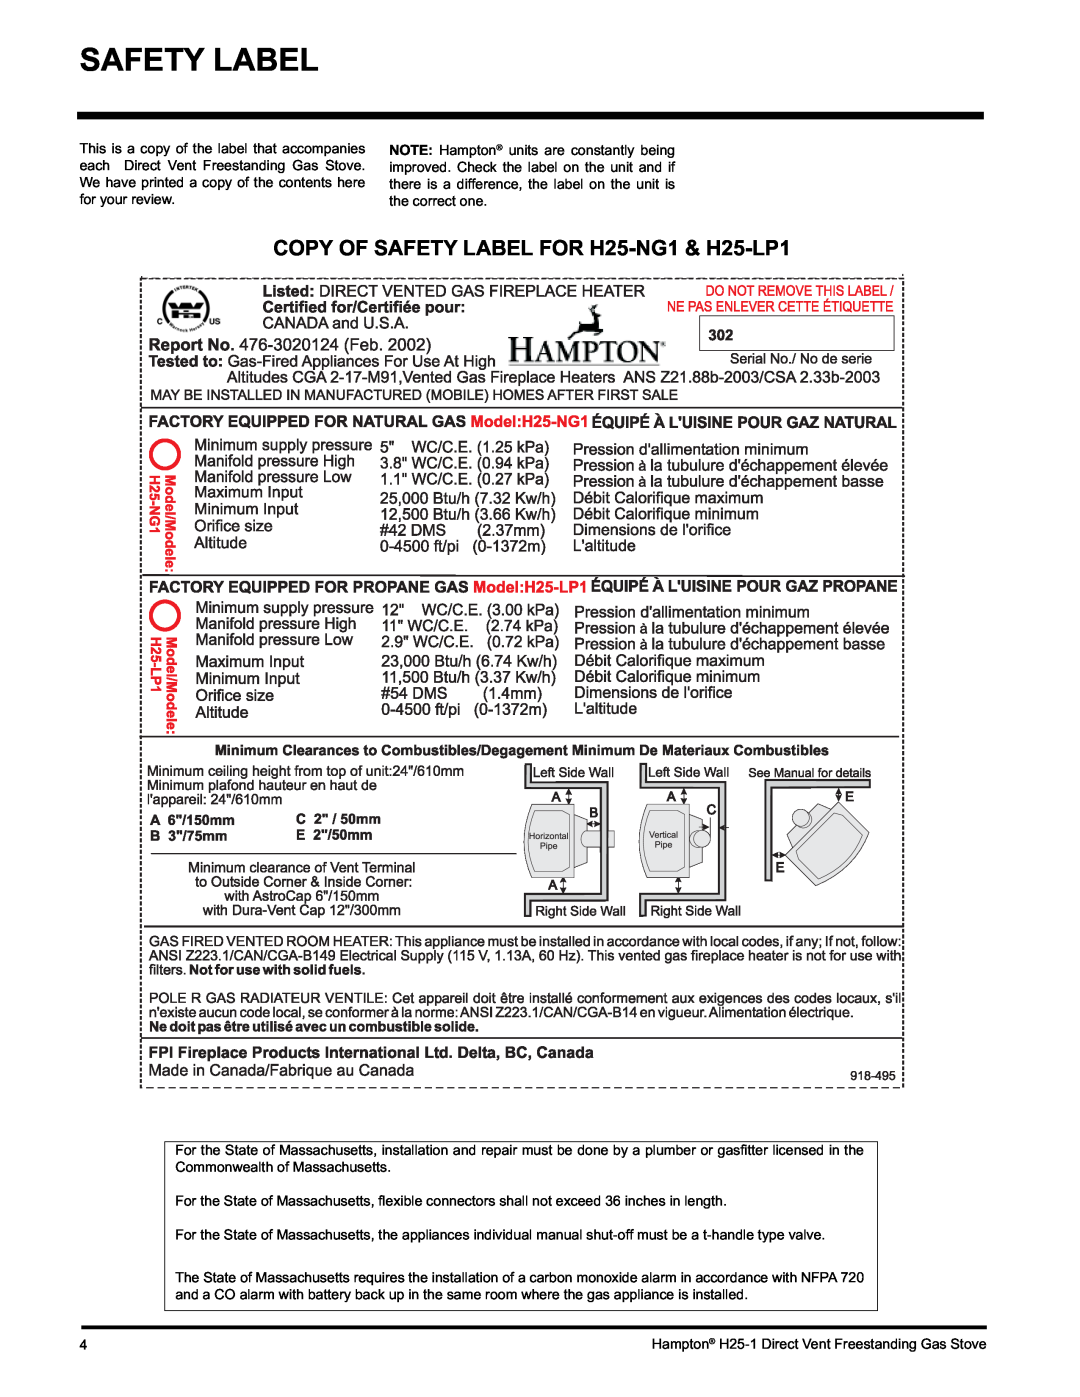 Hampton Direct H25-NG1, H25-LP1, H25-LP1 Propane installation manual Safety Label, COPY OF SAFETY LABEL FOR H25-NG1& H25-LP1 